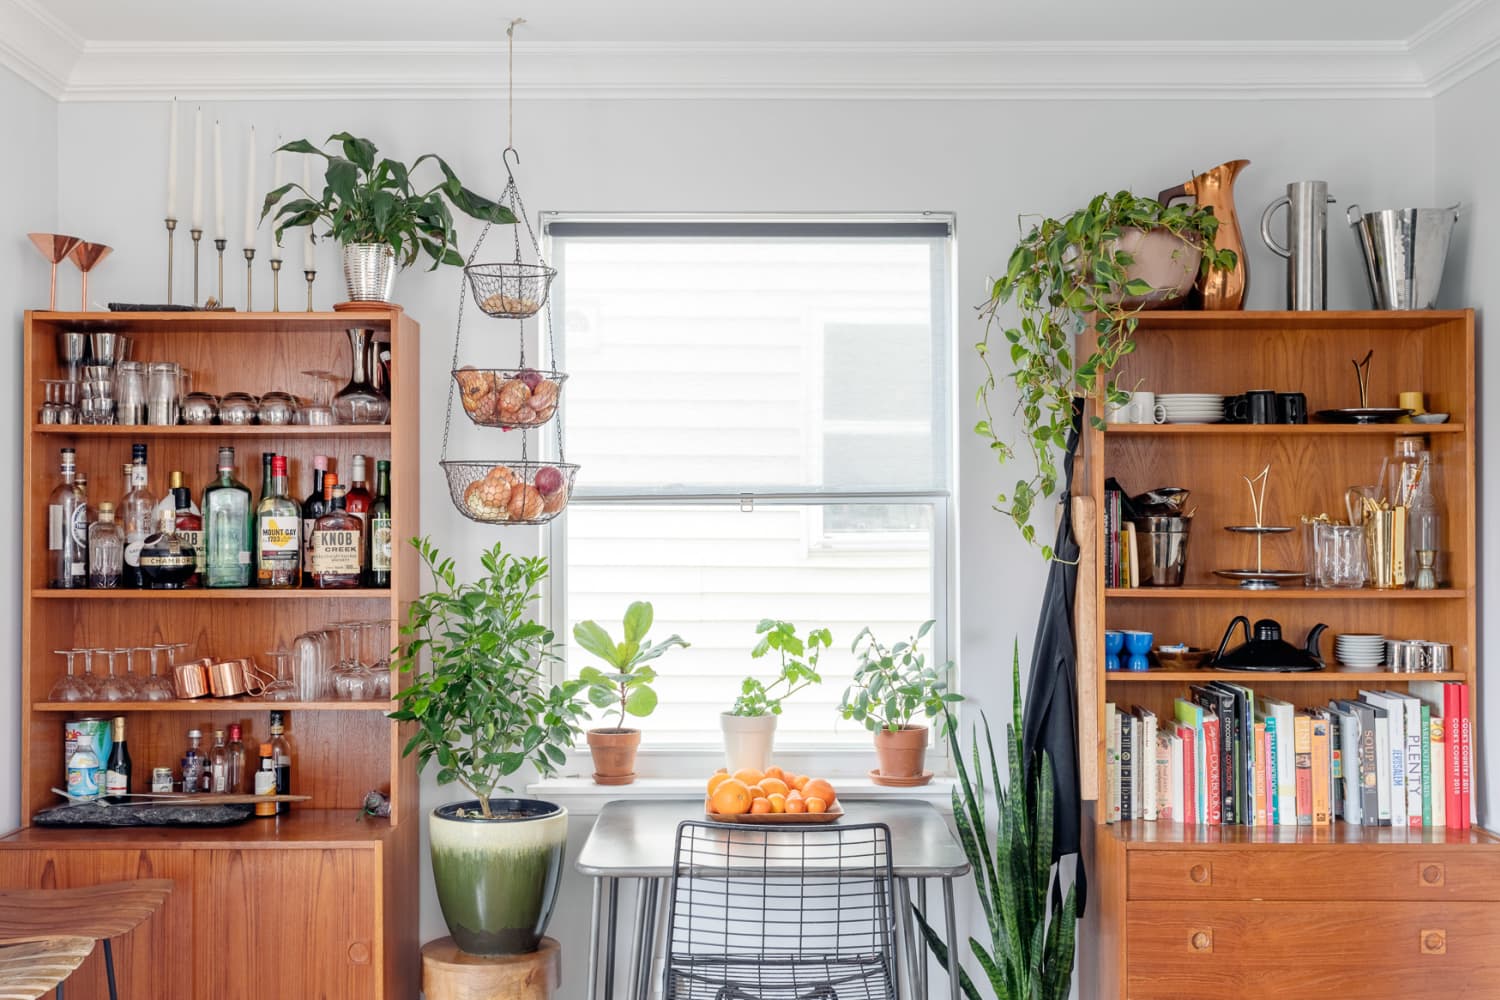 This Thrifted Shelf Hack Is “So Clever” and Couldn’t Be Any Easier